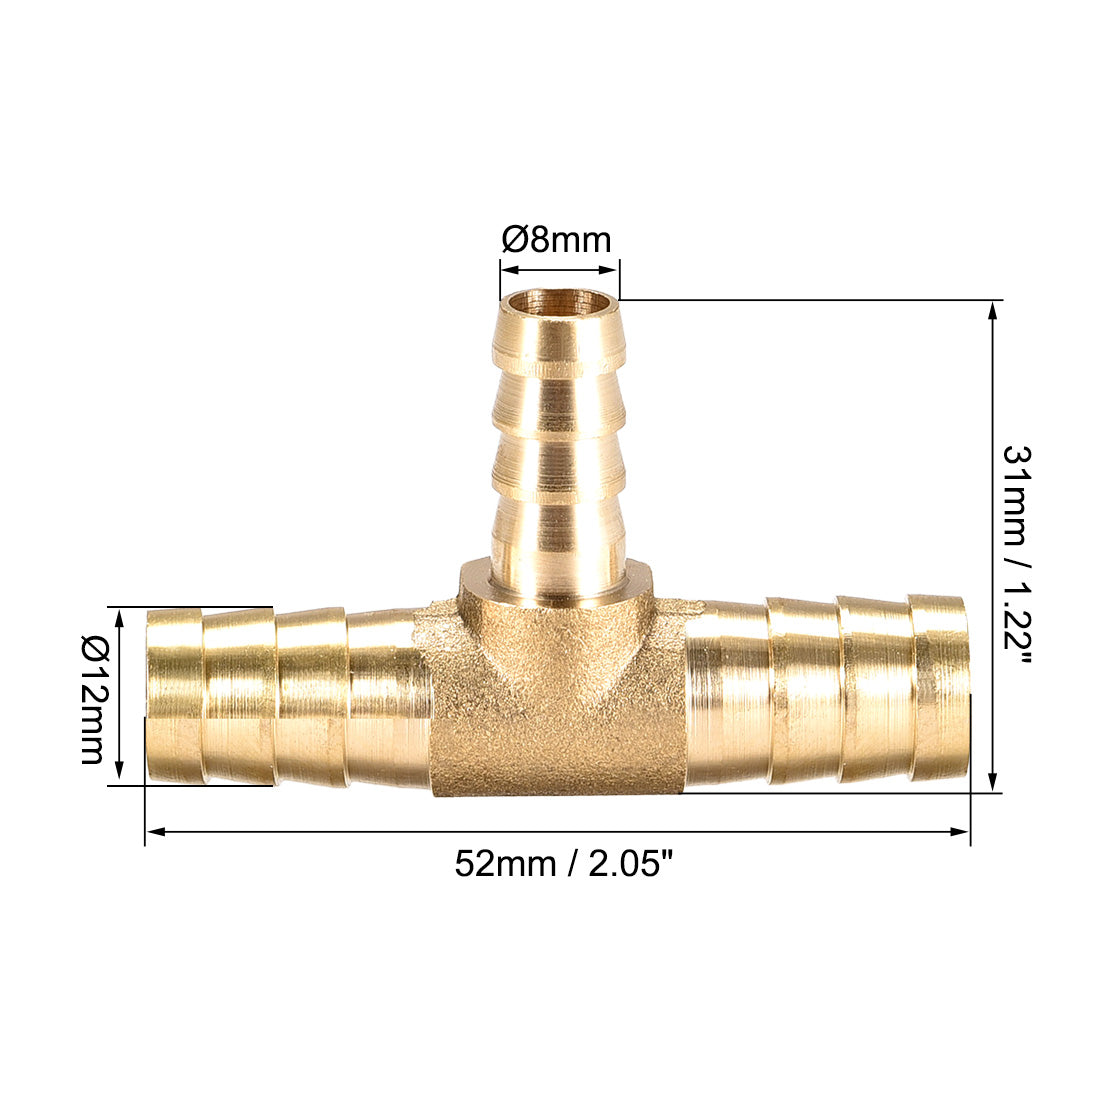 Uxcell Uxcell Tee Brass Barb Fitting Reducer 3 Way, Fit Hose ID 10mm x 6mm x 10mm 2pcs